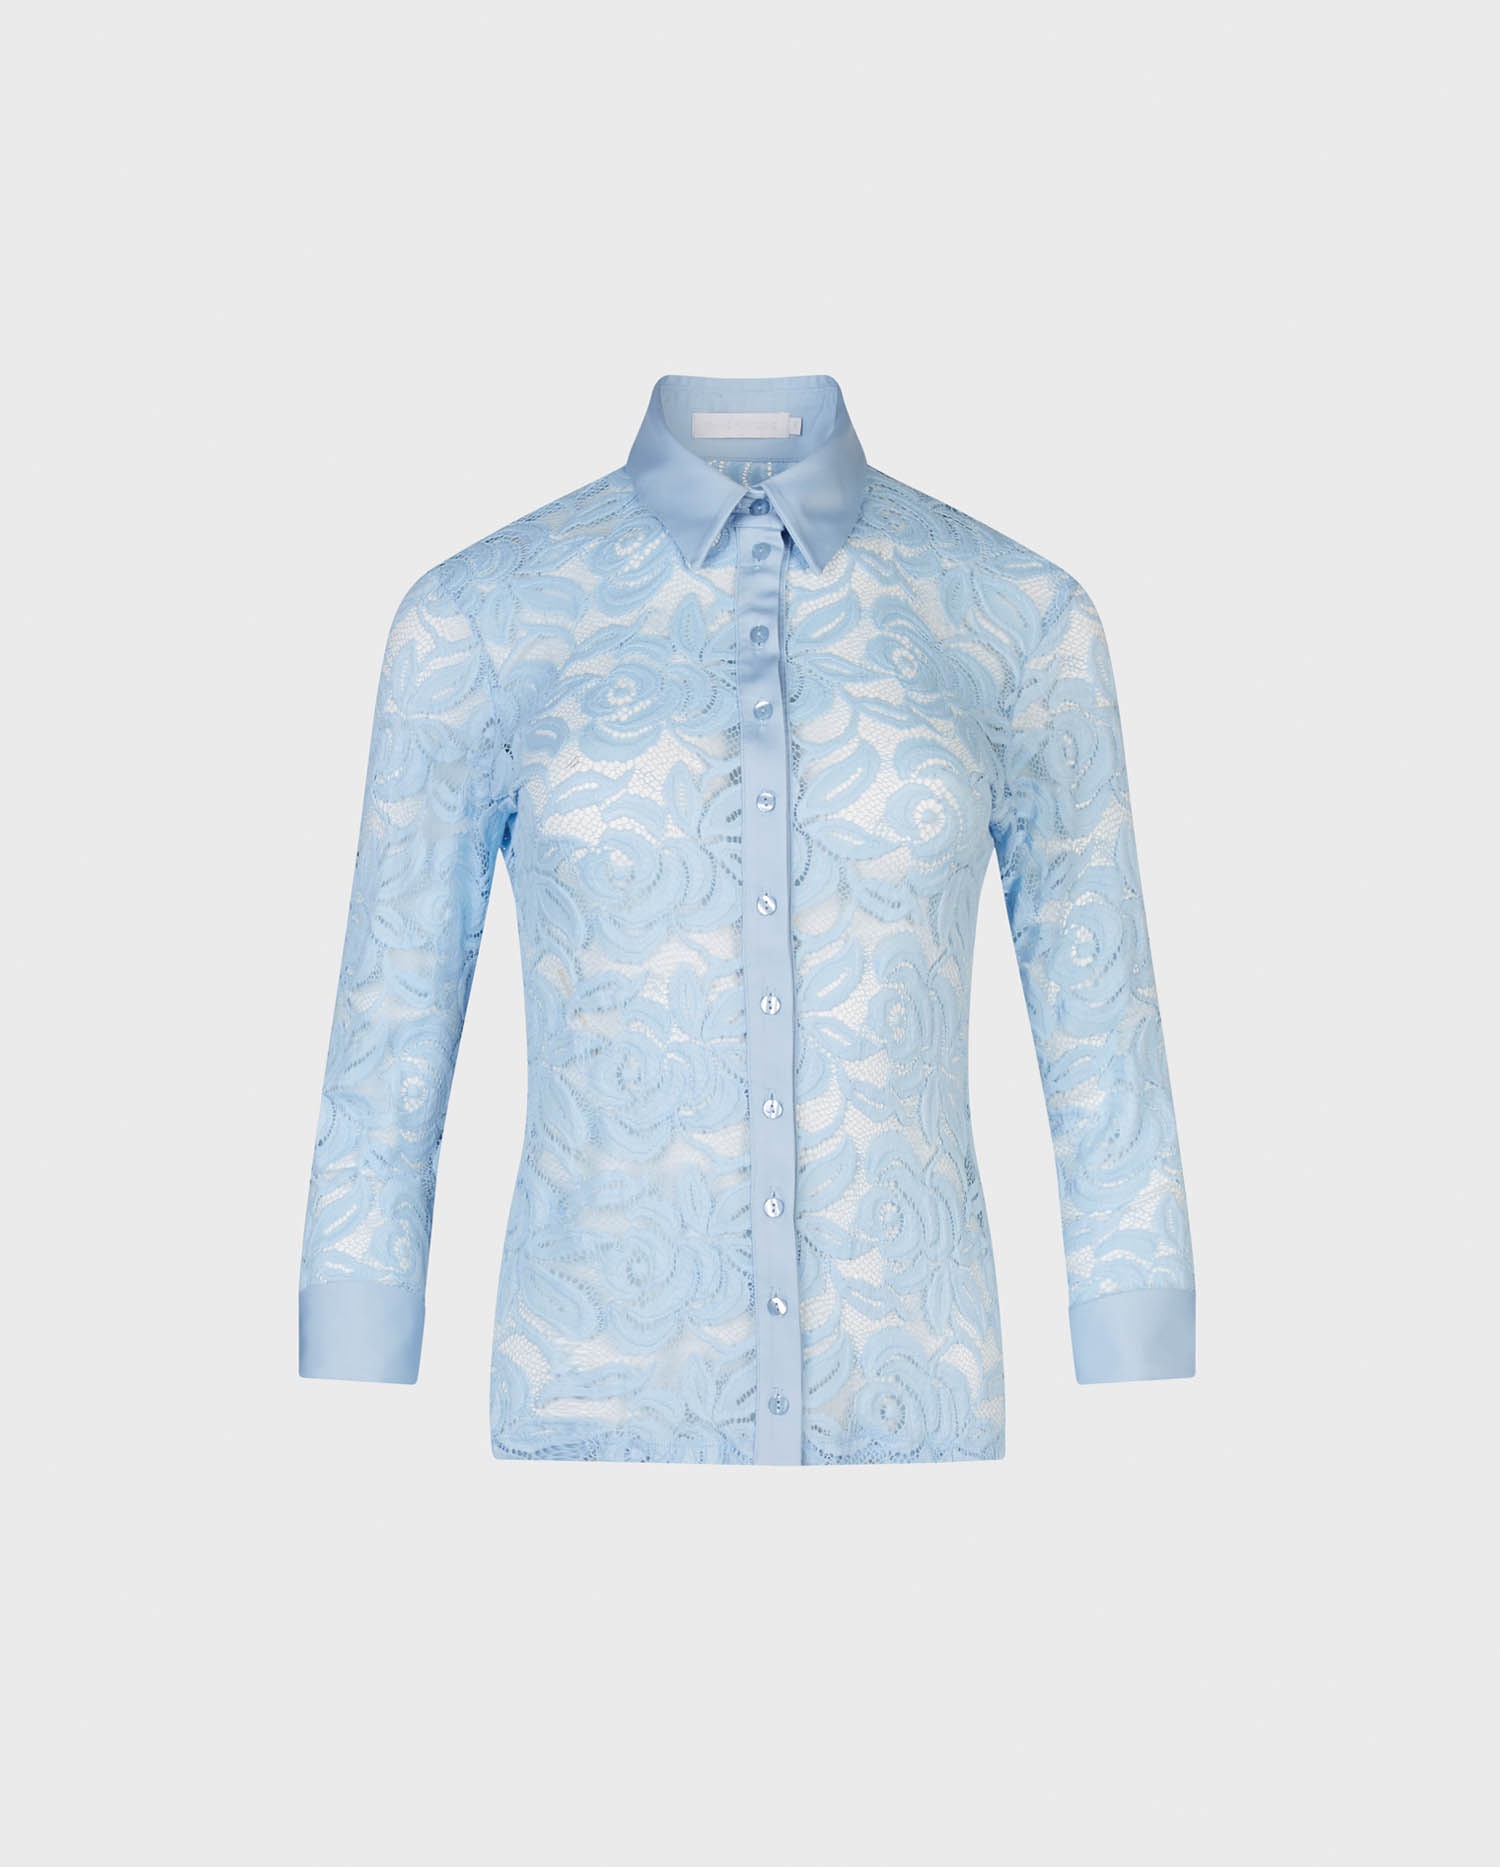 Shop the NAHIA button down shirt with 3/4 sleeves in riviera blue from designer Anne Fontaine